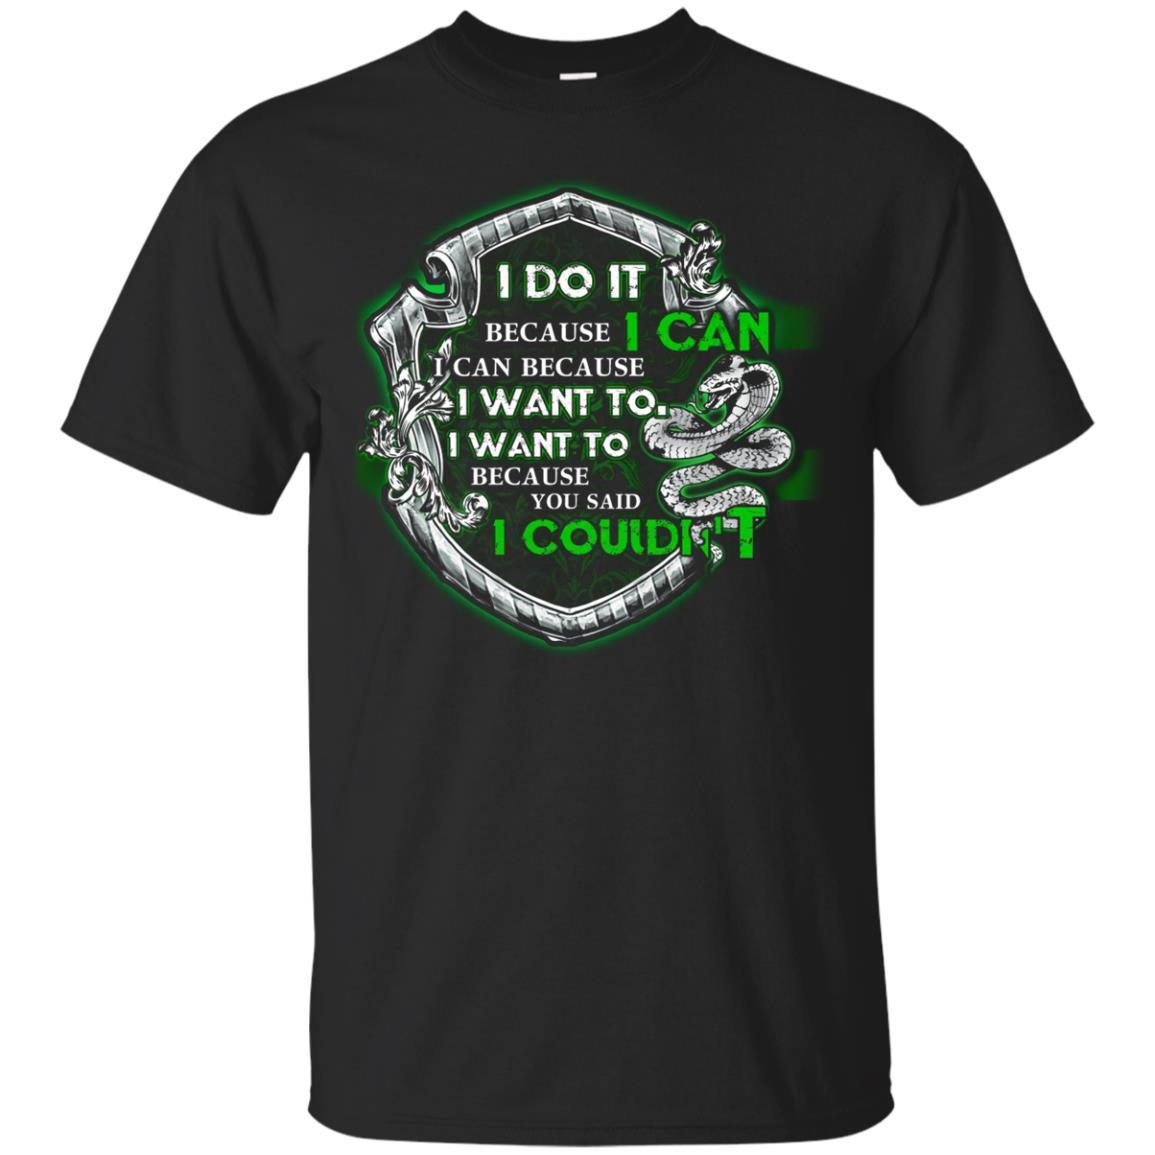 I Do It Because I Can I Can Because I Want To I Want To Because You Said I Couldn't Slytherin House Harry Potter Shirt Black S 